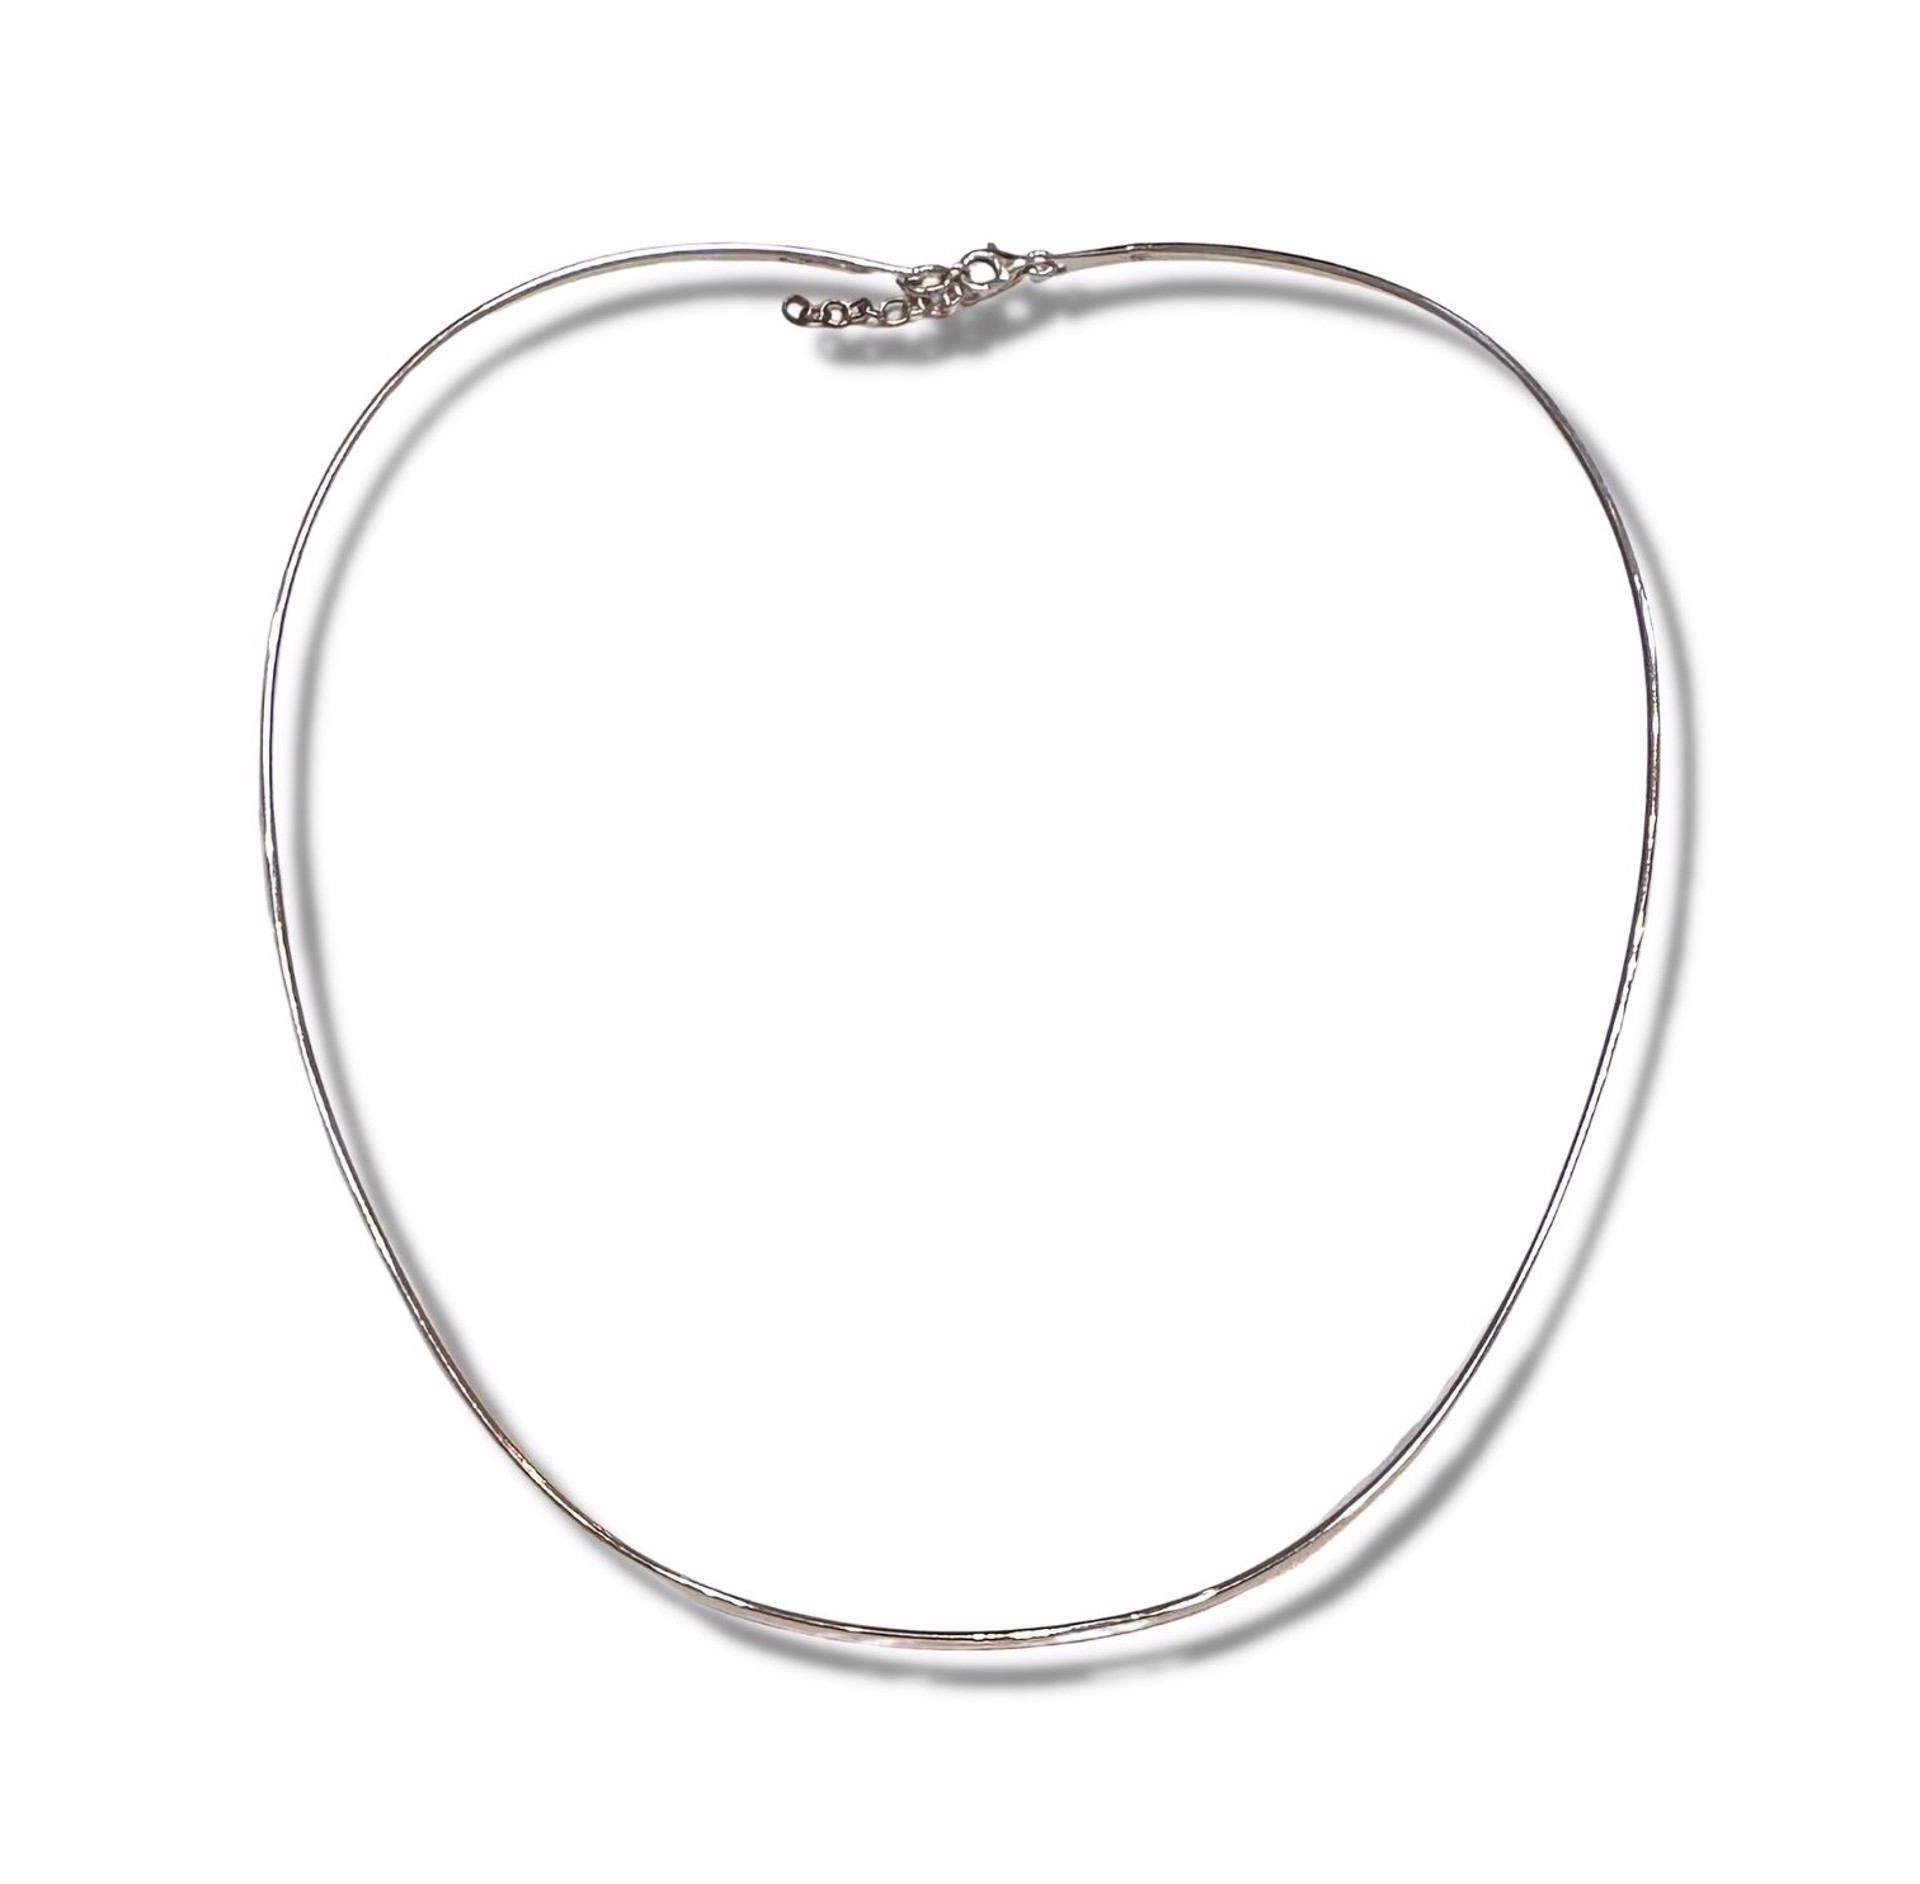 Necklace - Sterling Silver Neck Ring with Chain by Kai Cook